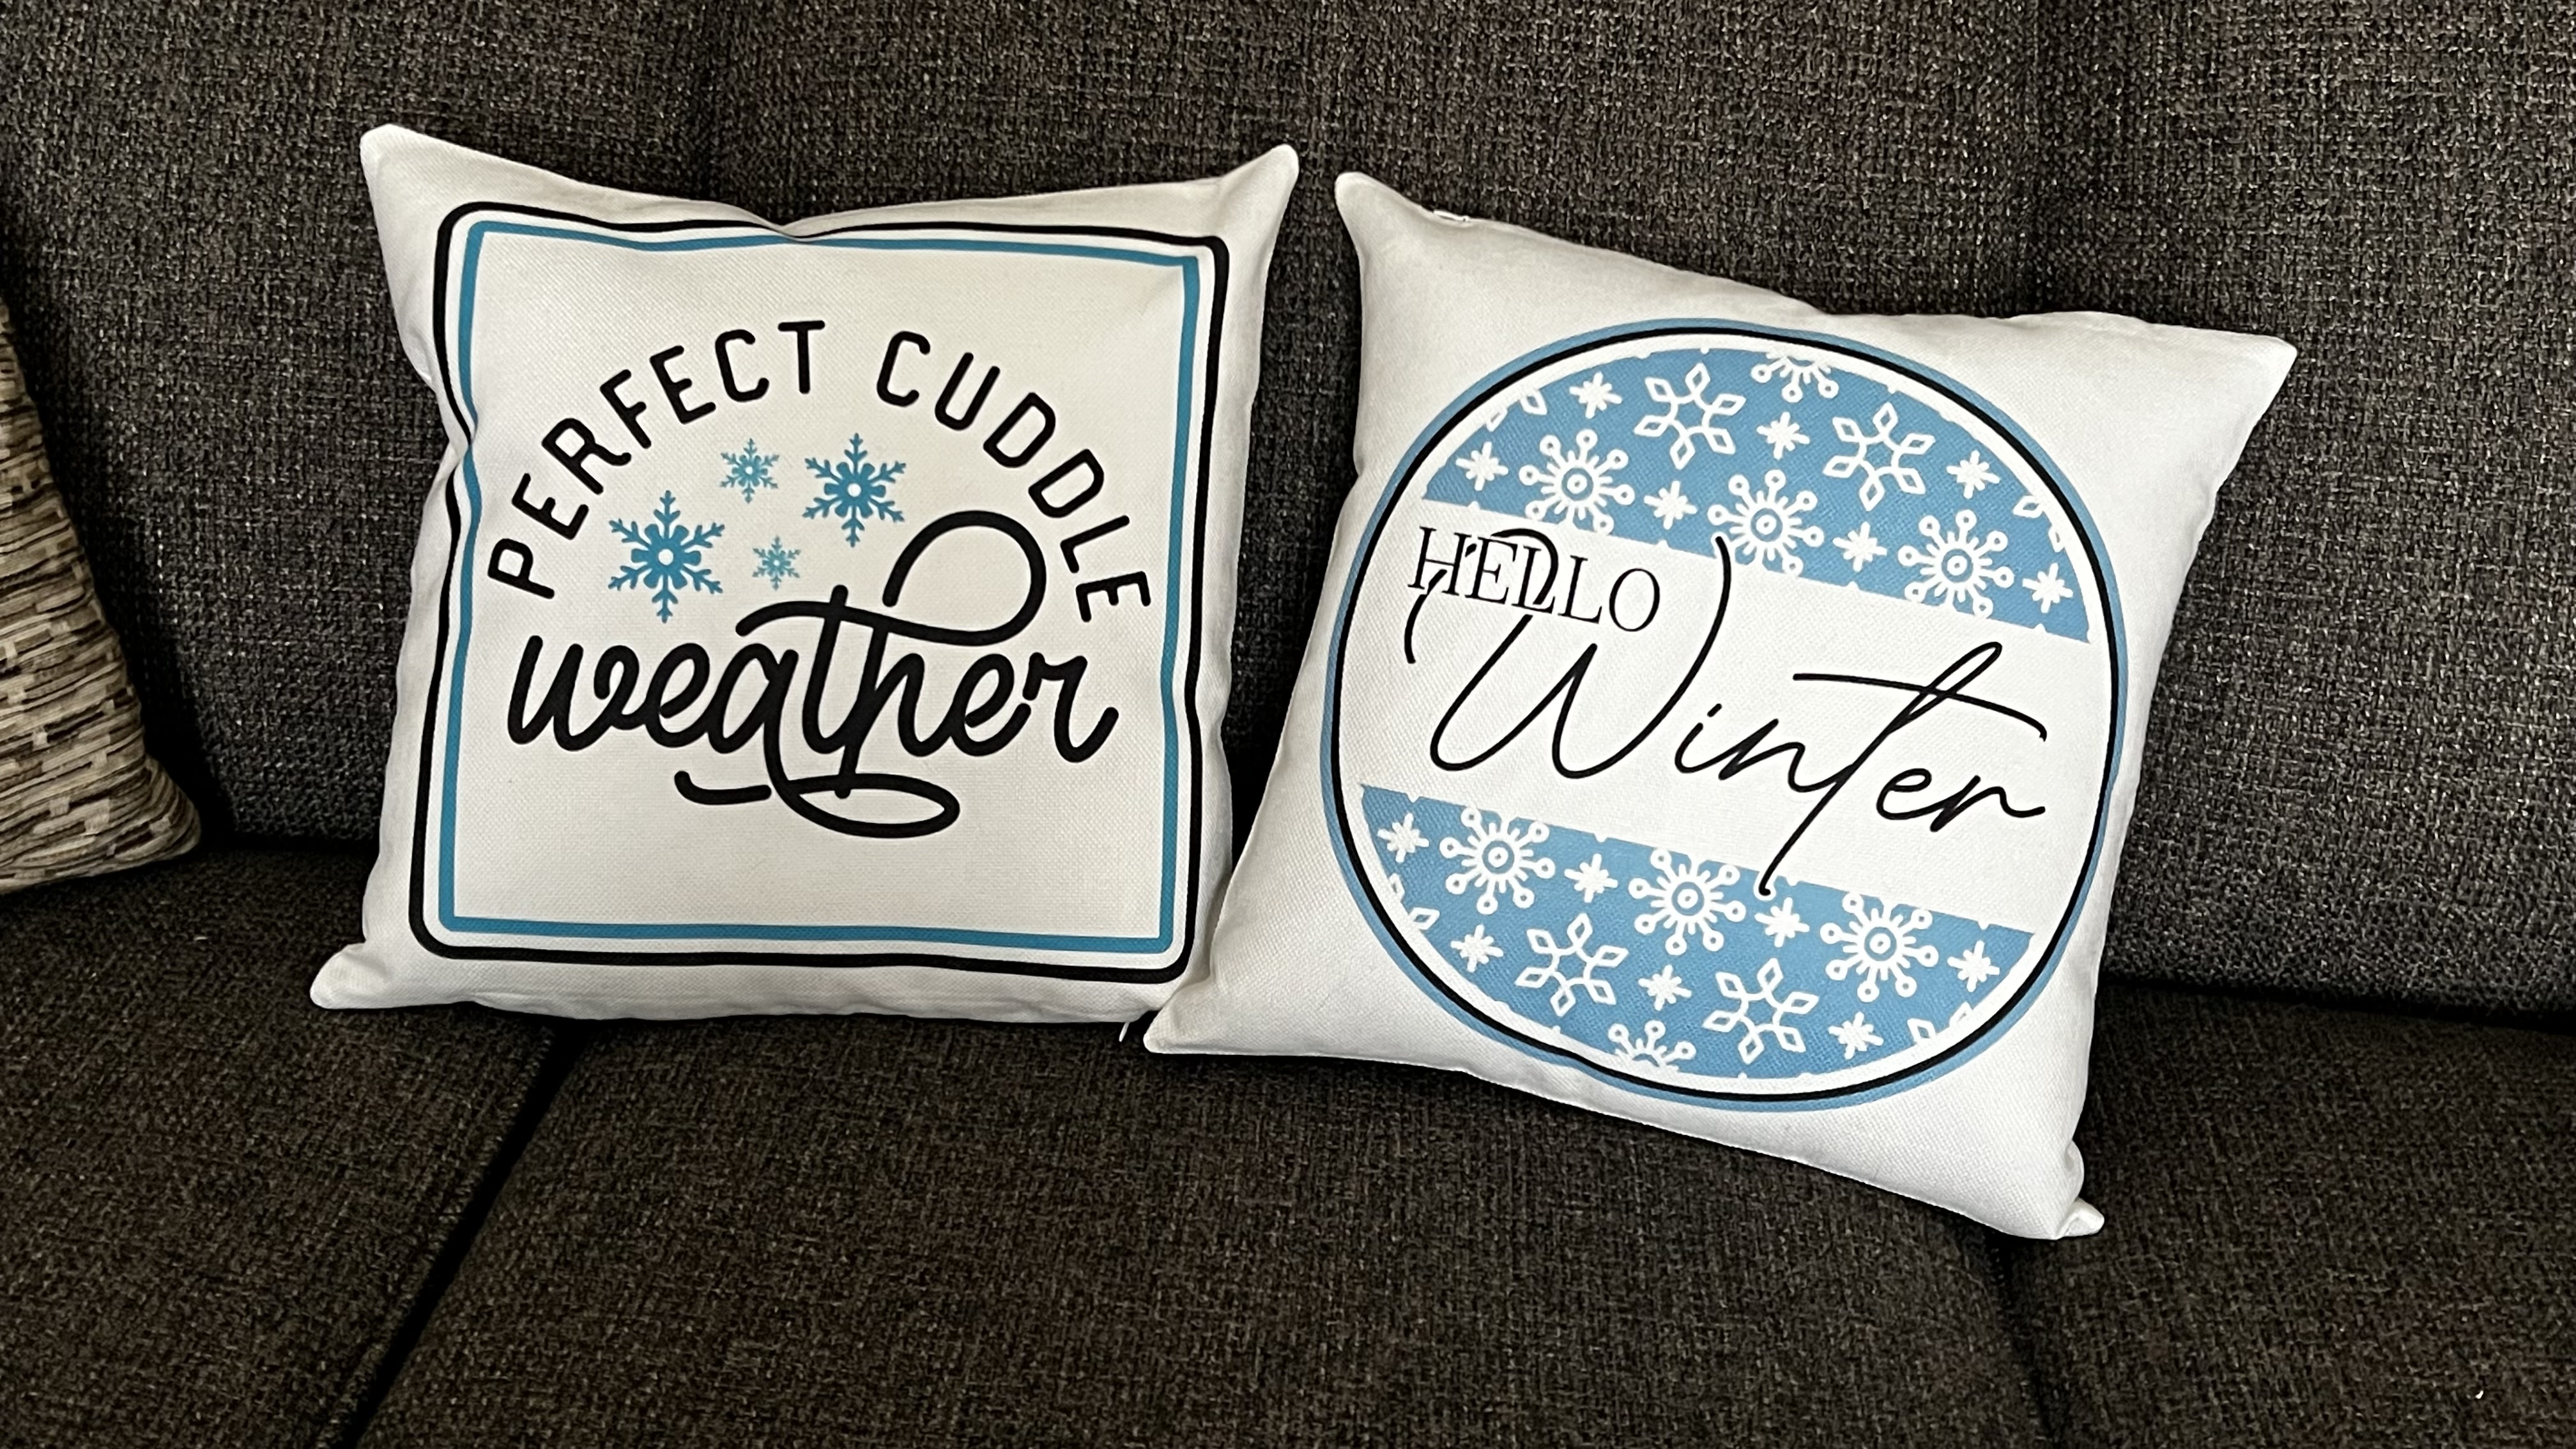 I love these pillow shames I order during the Black Friday sale. They sub very well. The colors